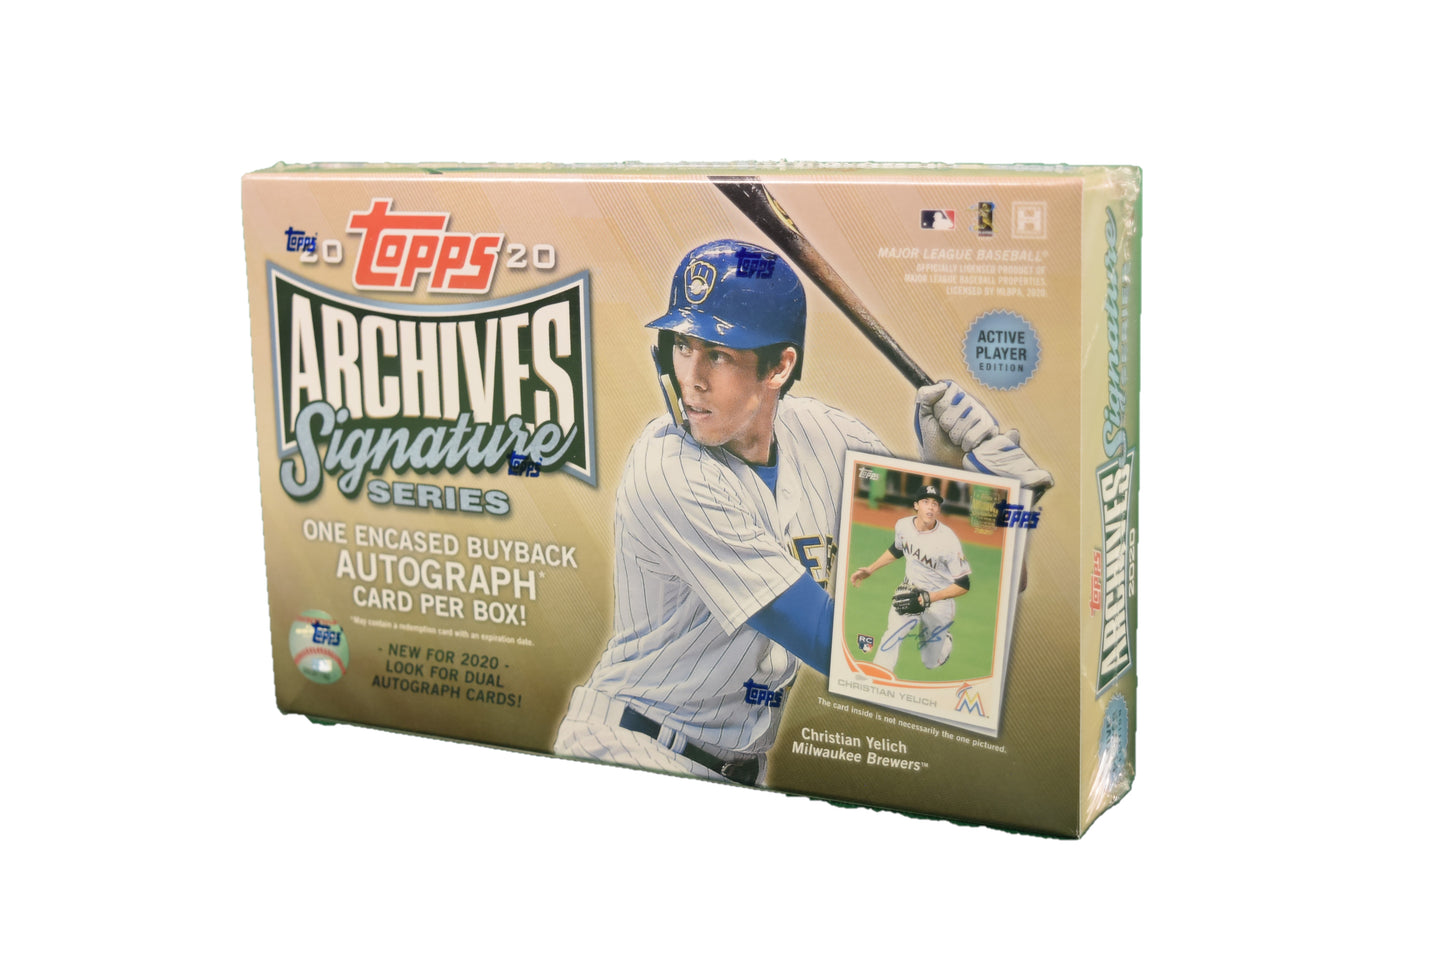 2020 Topps Archives Signature Series Baseball Active Player Edition Hobby Box*